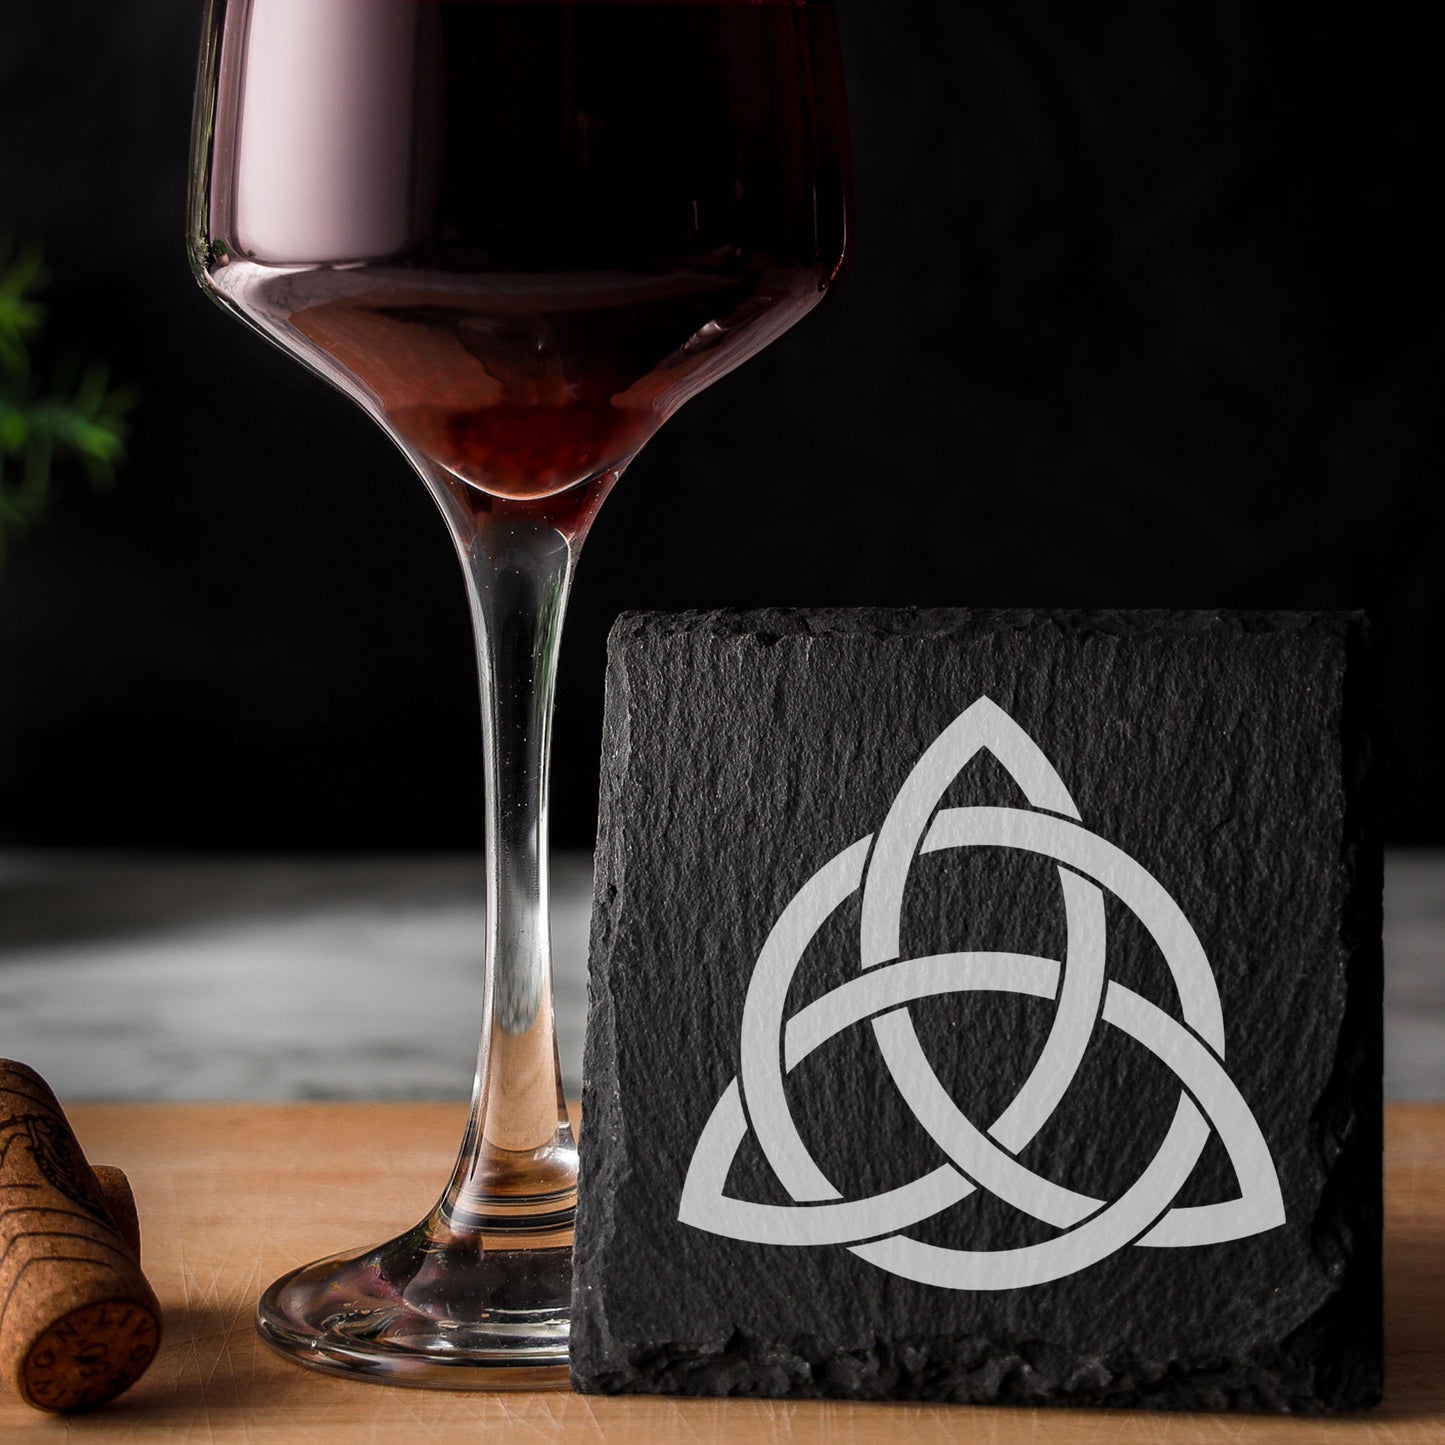 Celtic Knot Irish Engraved Wine Glass and/or Coaster Set  - Always Looking Good - Square Coaster Only  